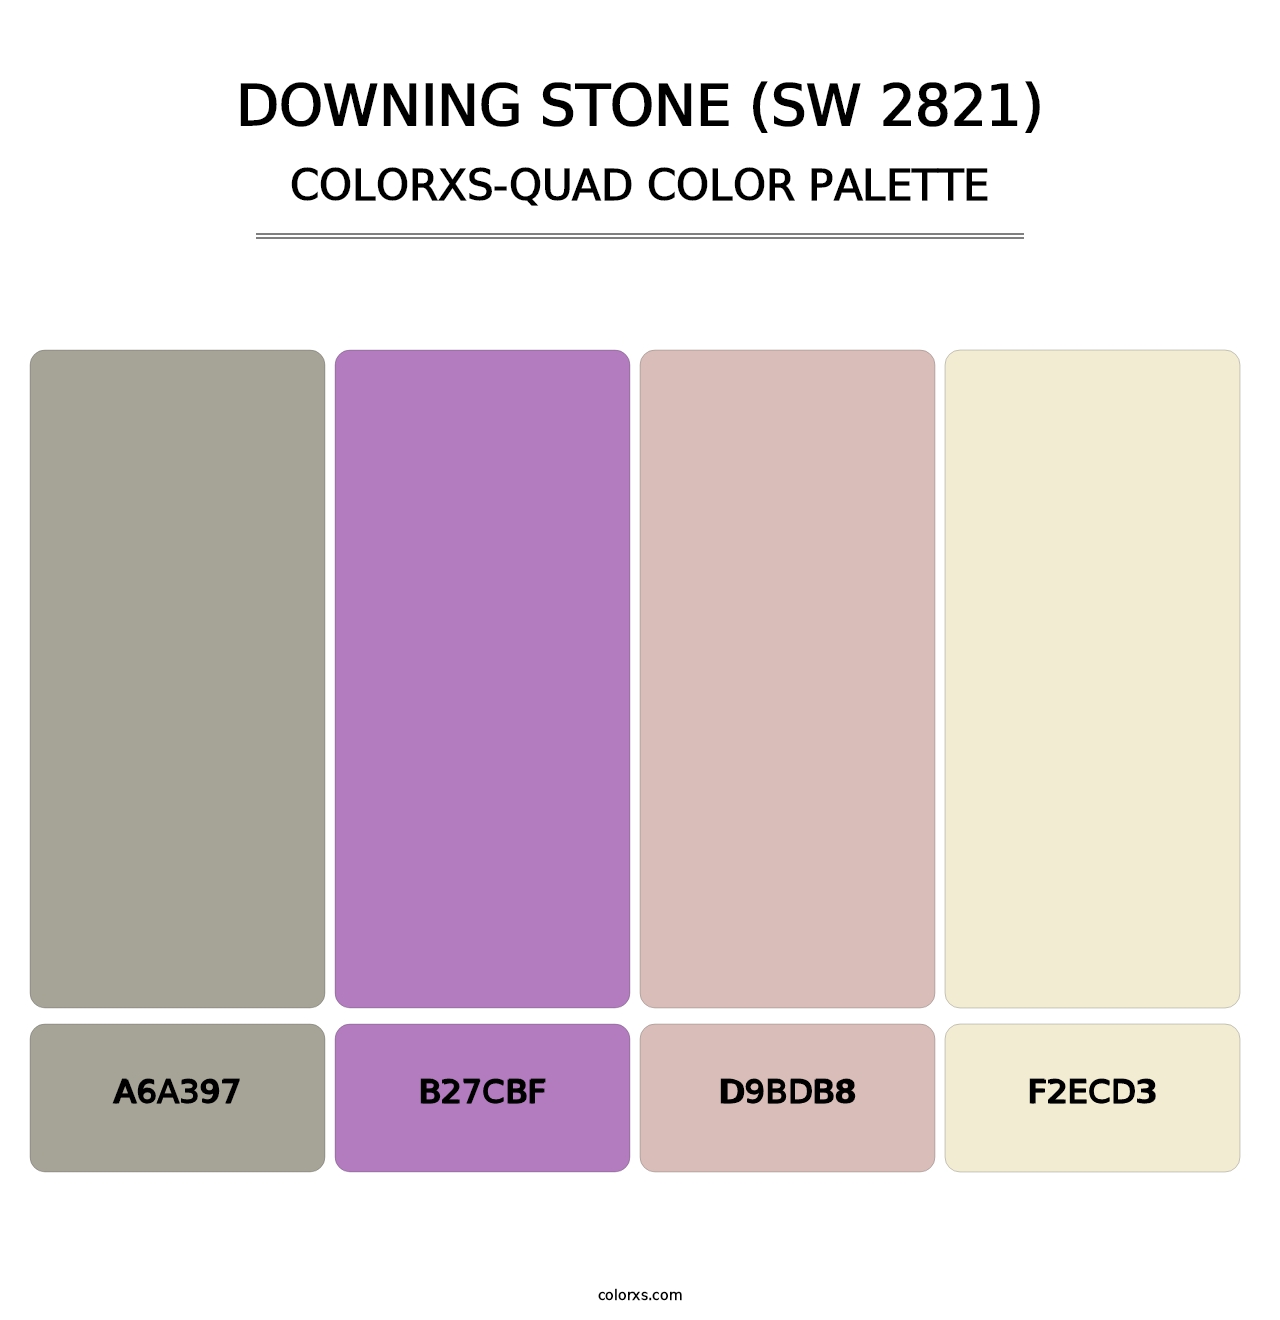 Downing Stone (SW 2821) - Colorxs Quad Palette